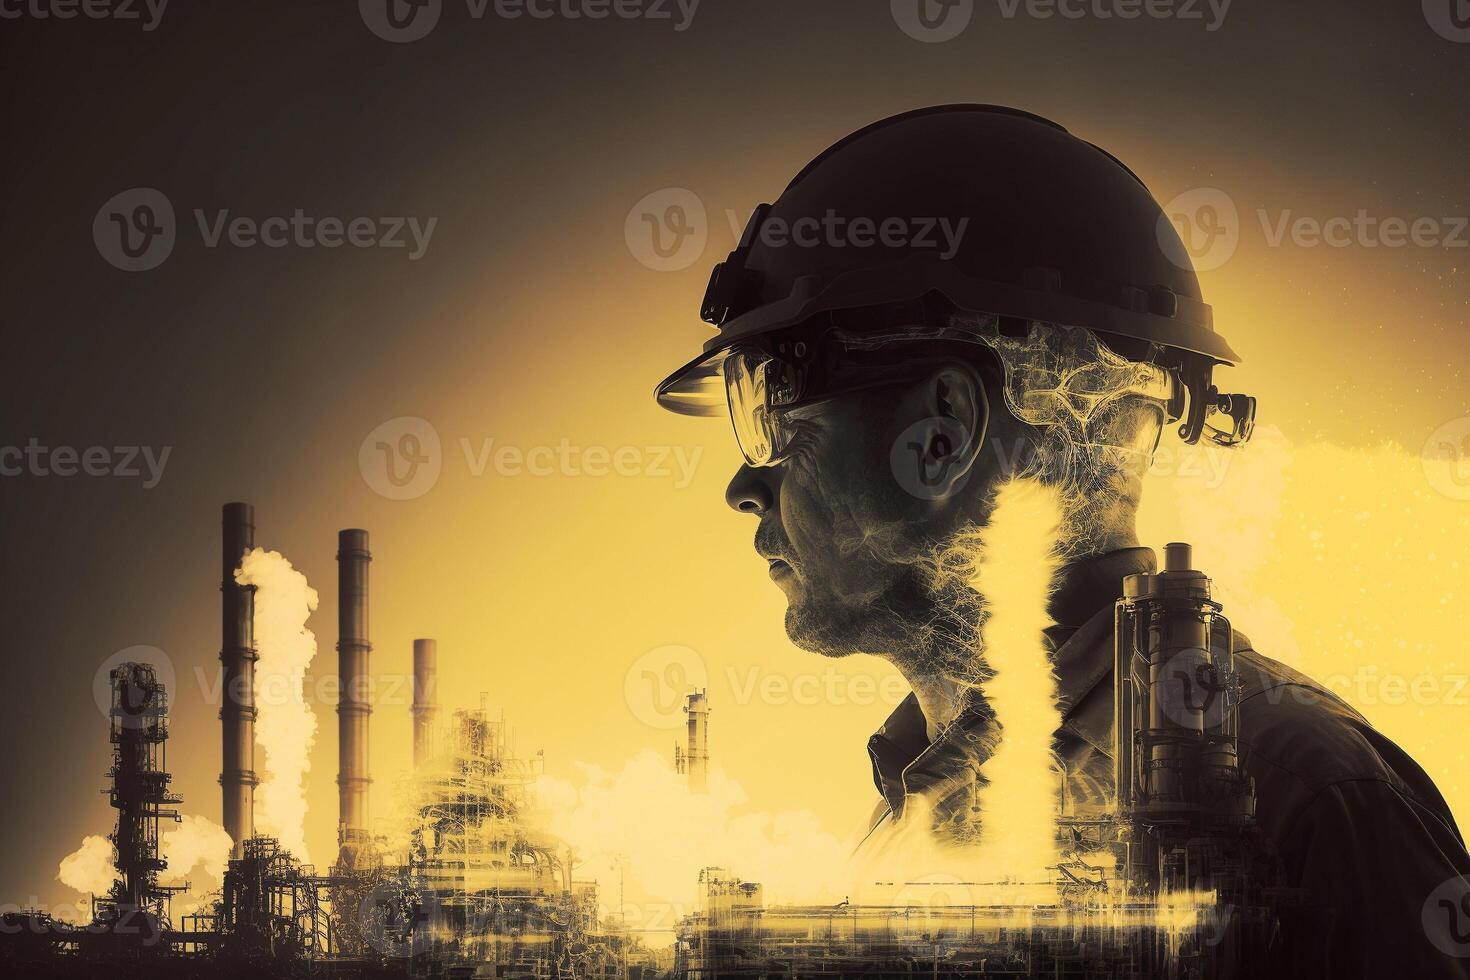 Double exposure art banner oil transportation Petrochemical oil and gas pipelines Refiners and power engineers working in the power industry. photo